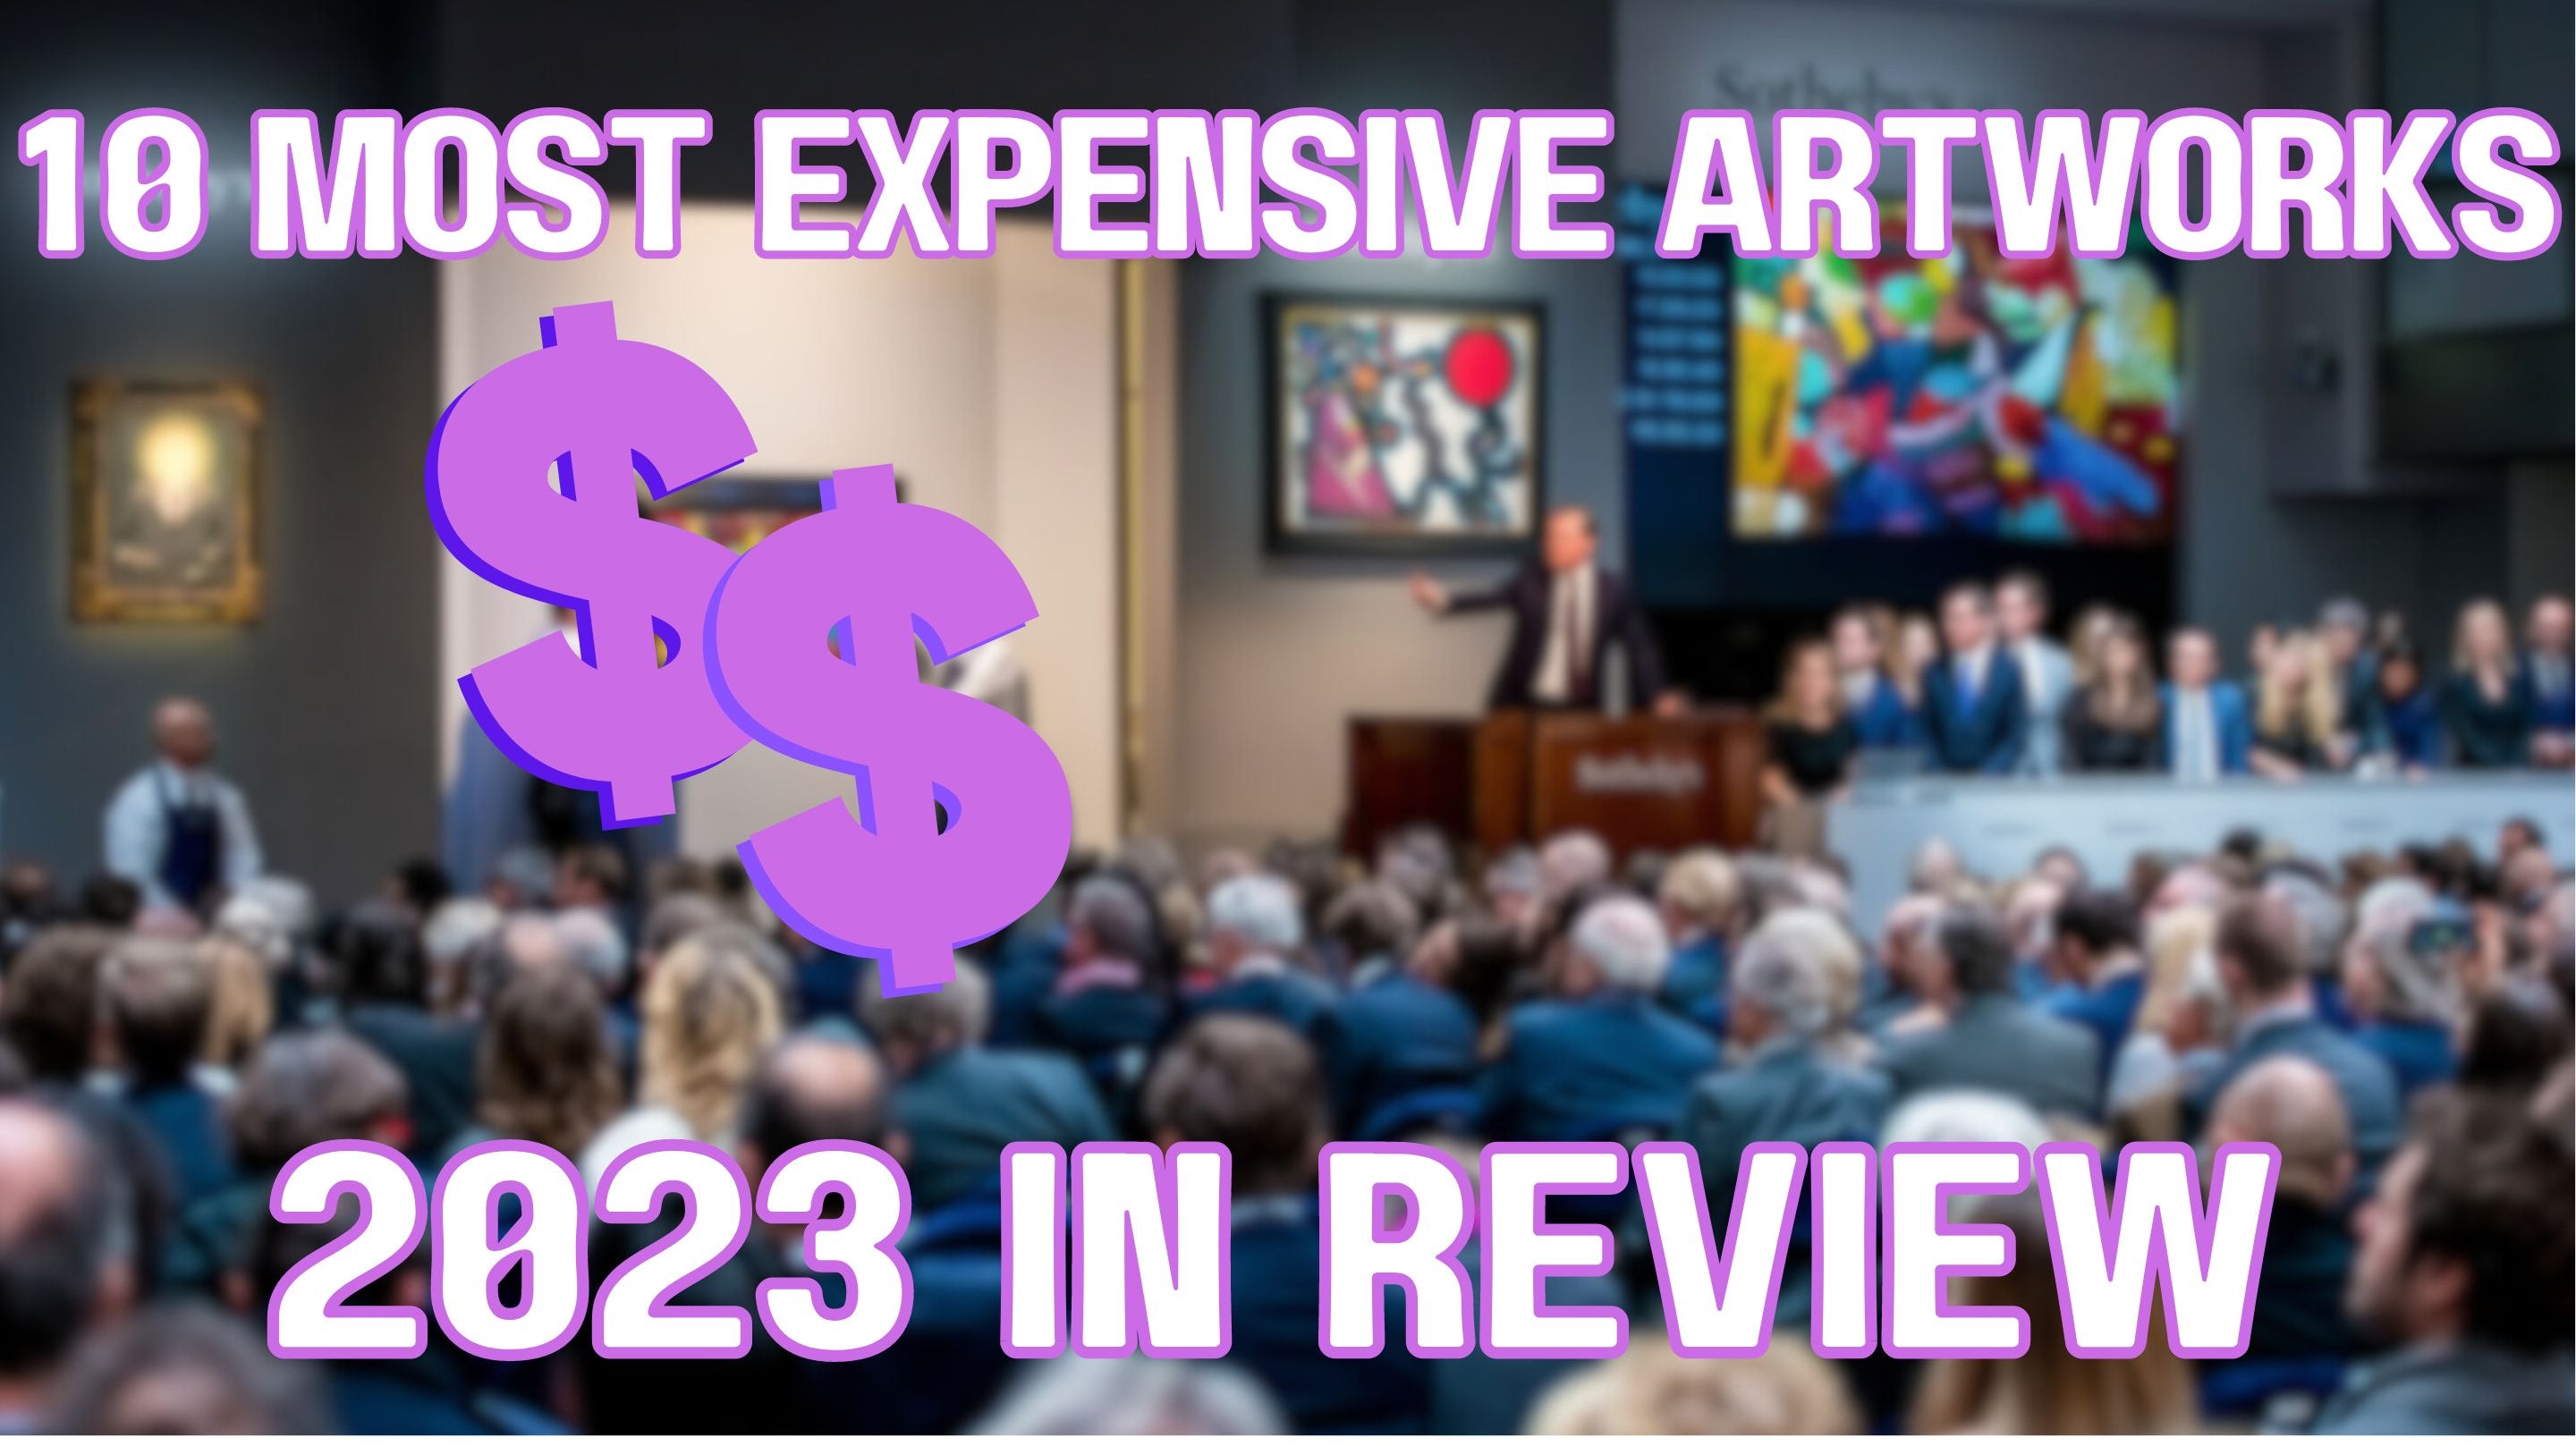 Top 10 Most Expensive Artworks Auctioned in 2023